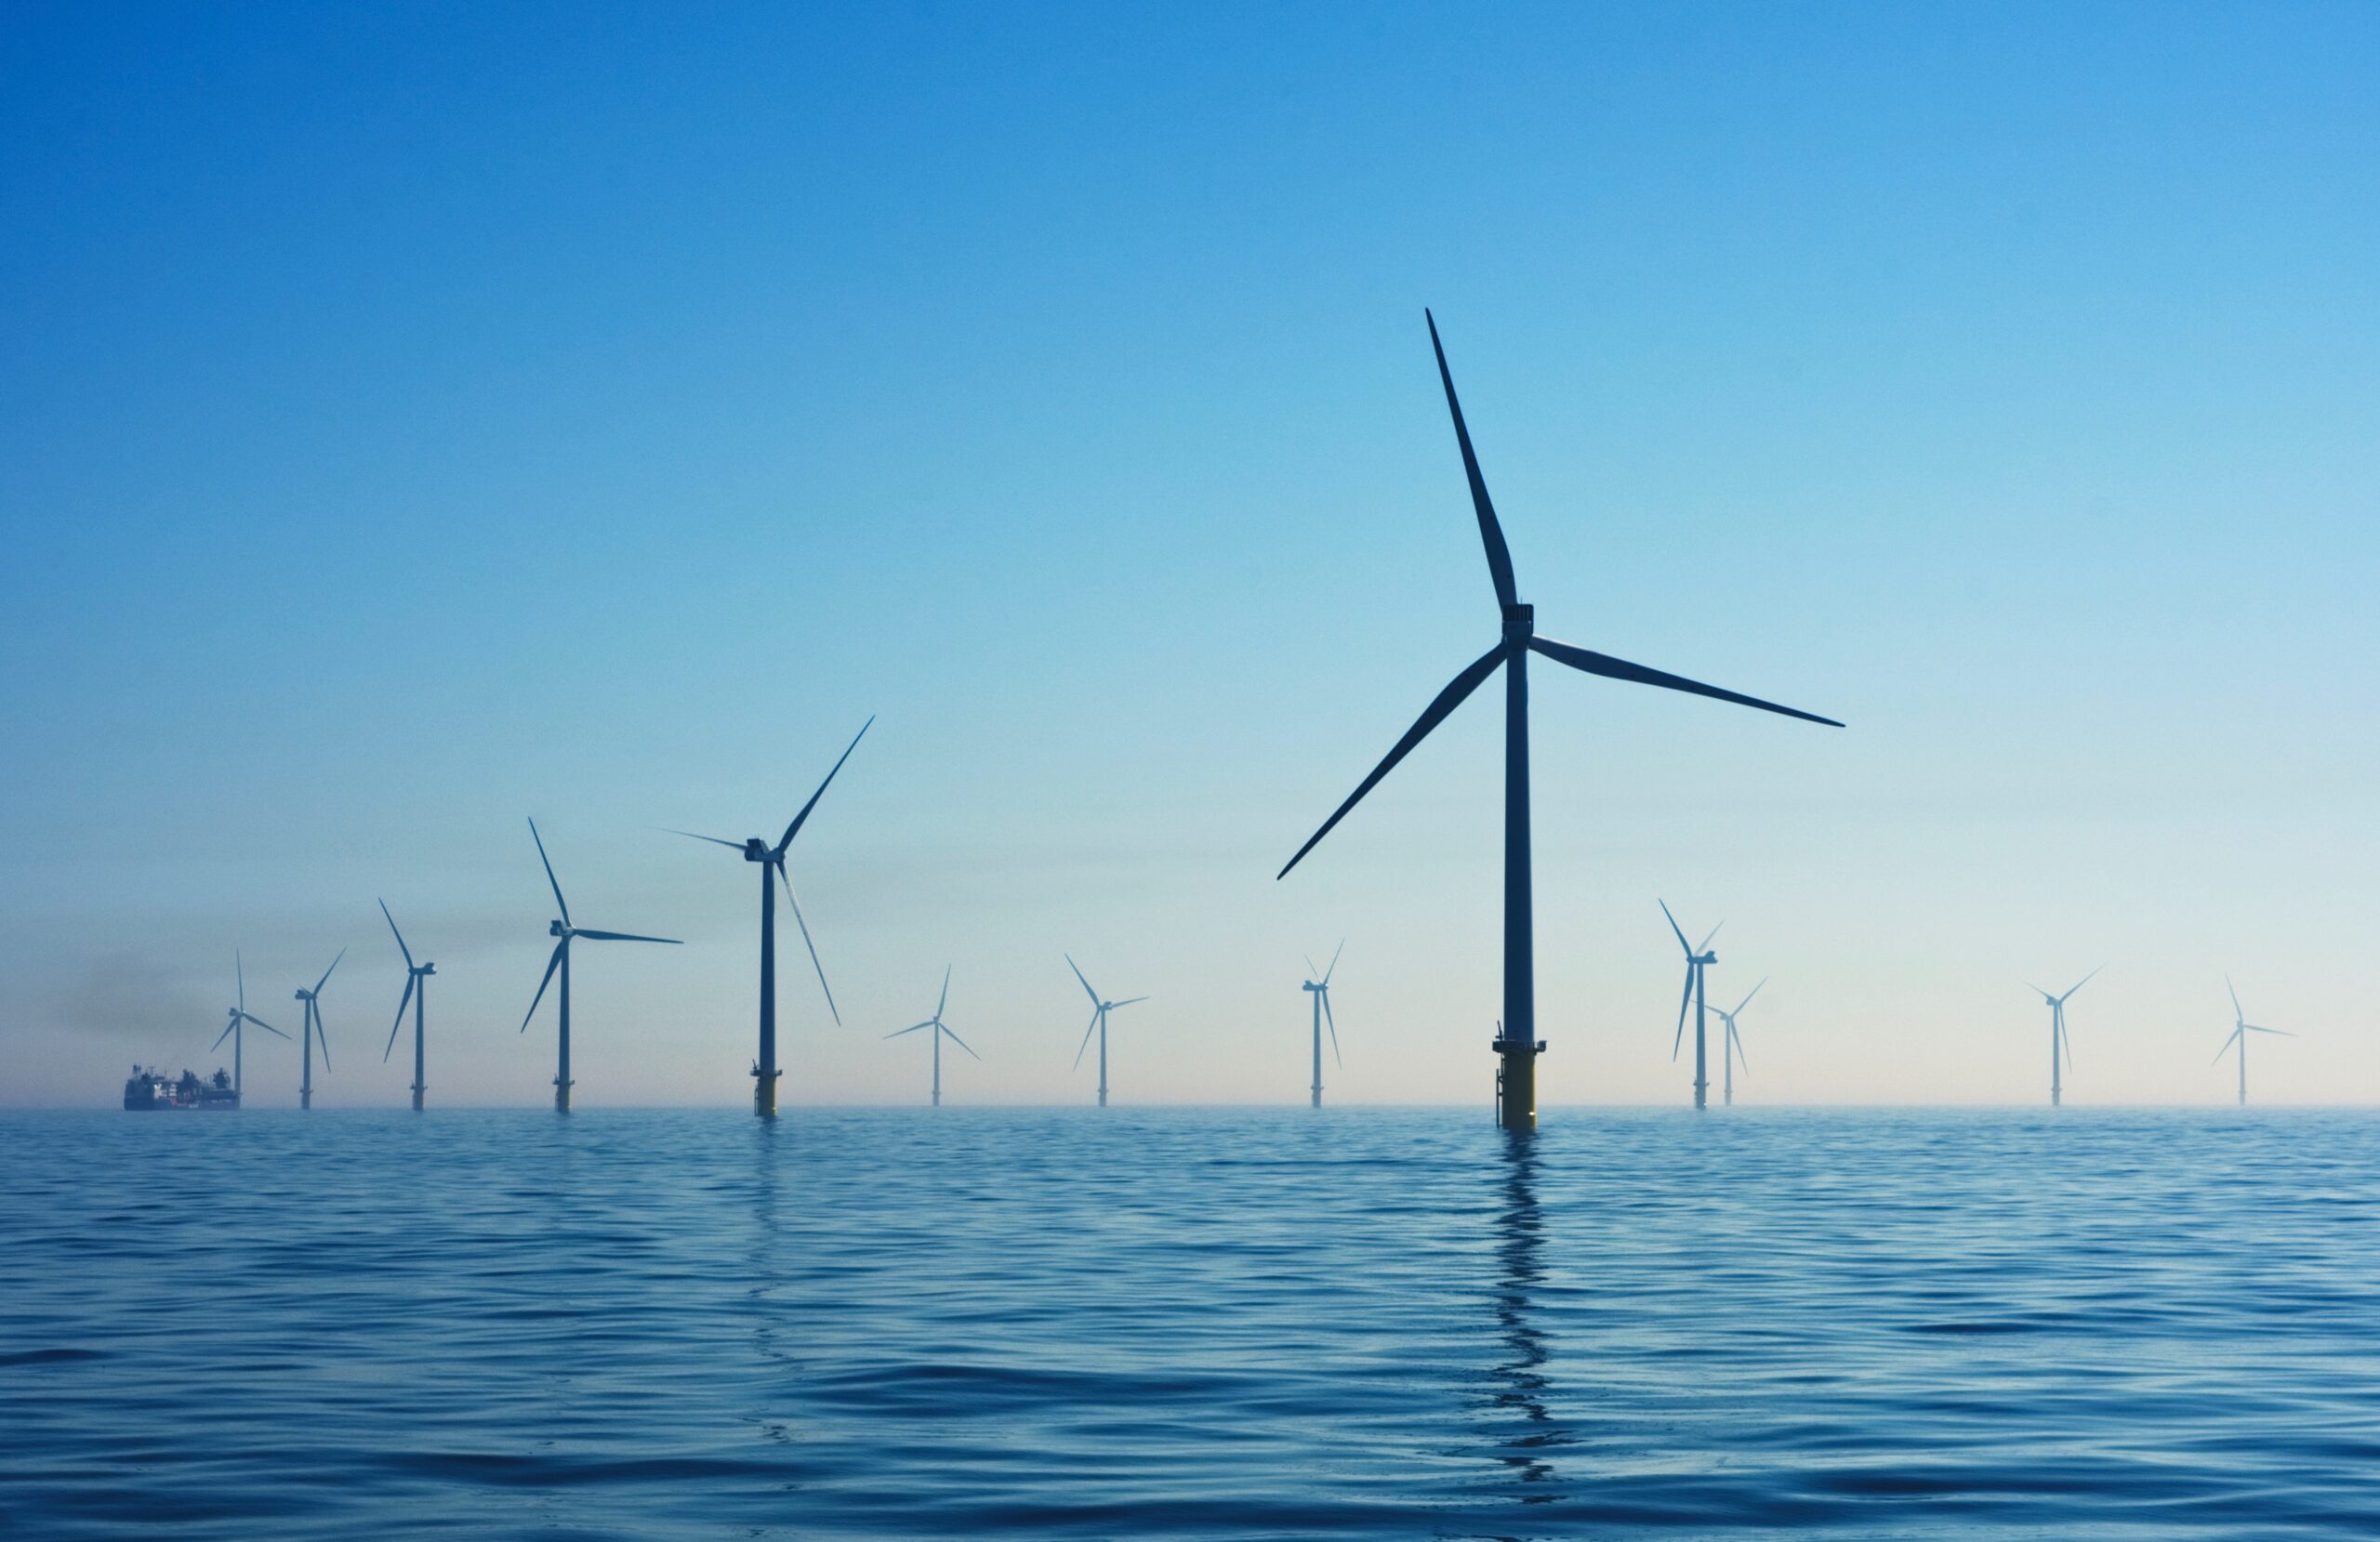 Designing a More Equitable Offshore Wind Industry